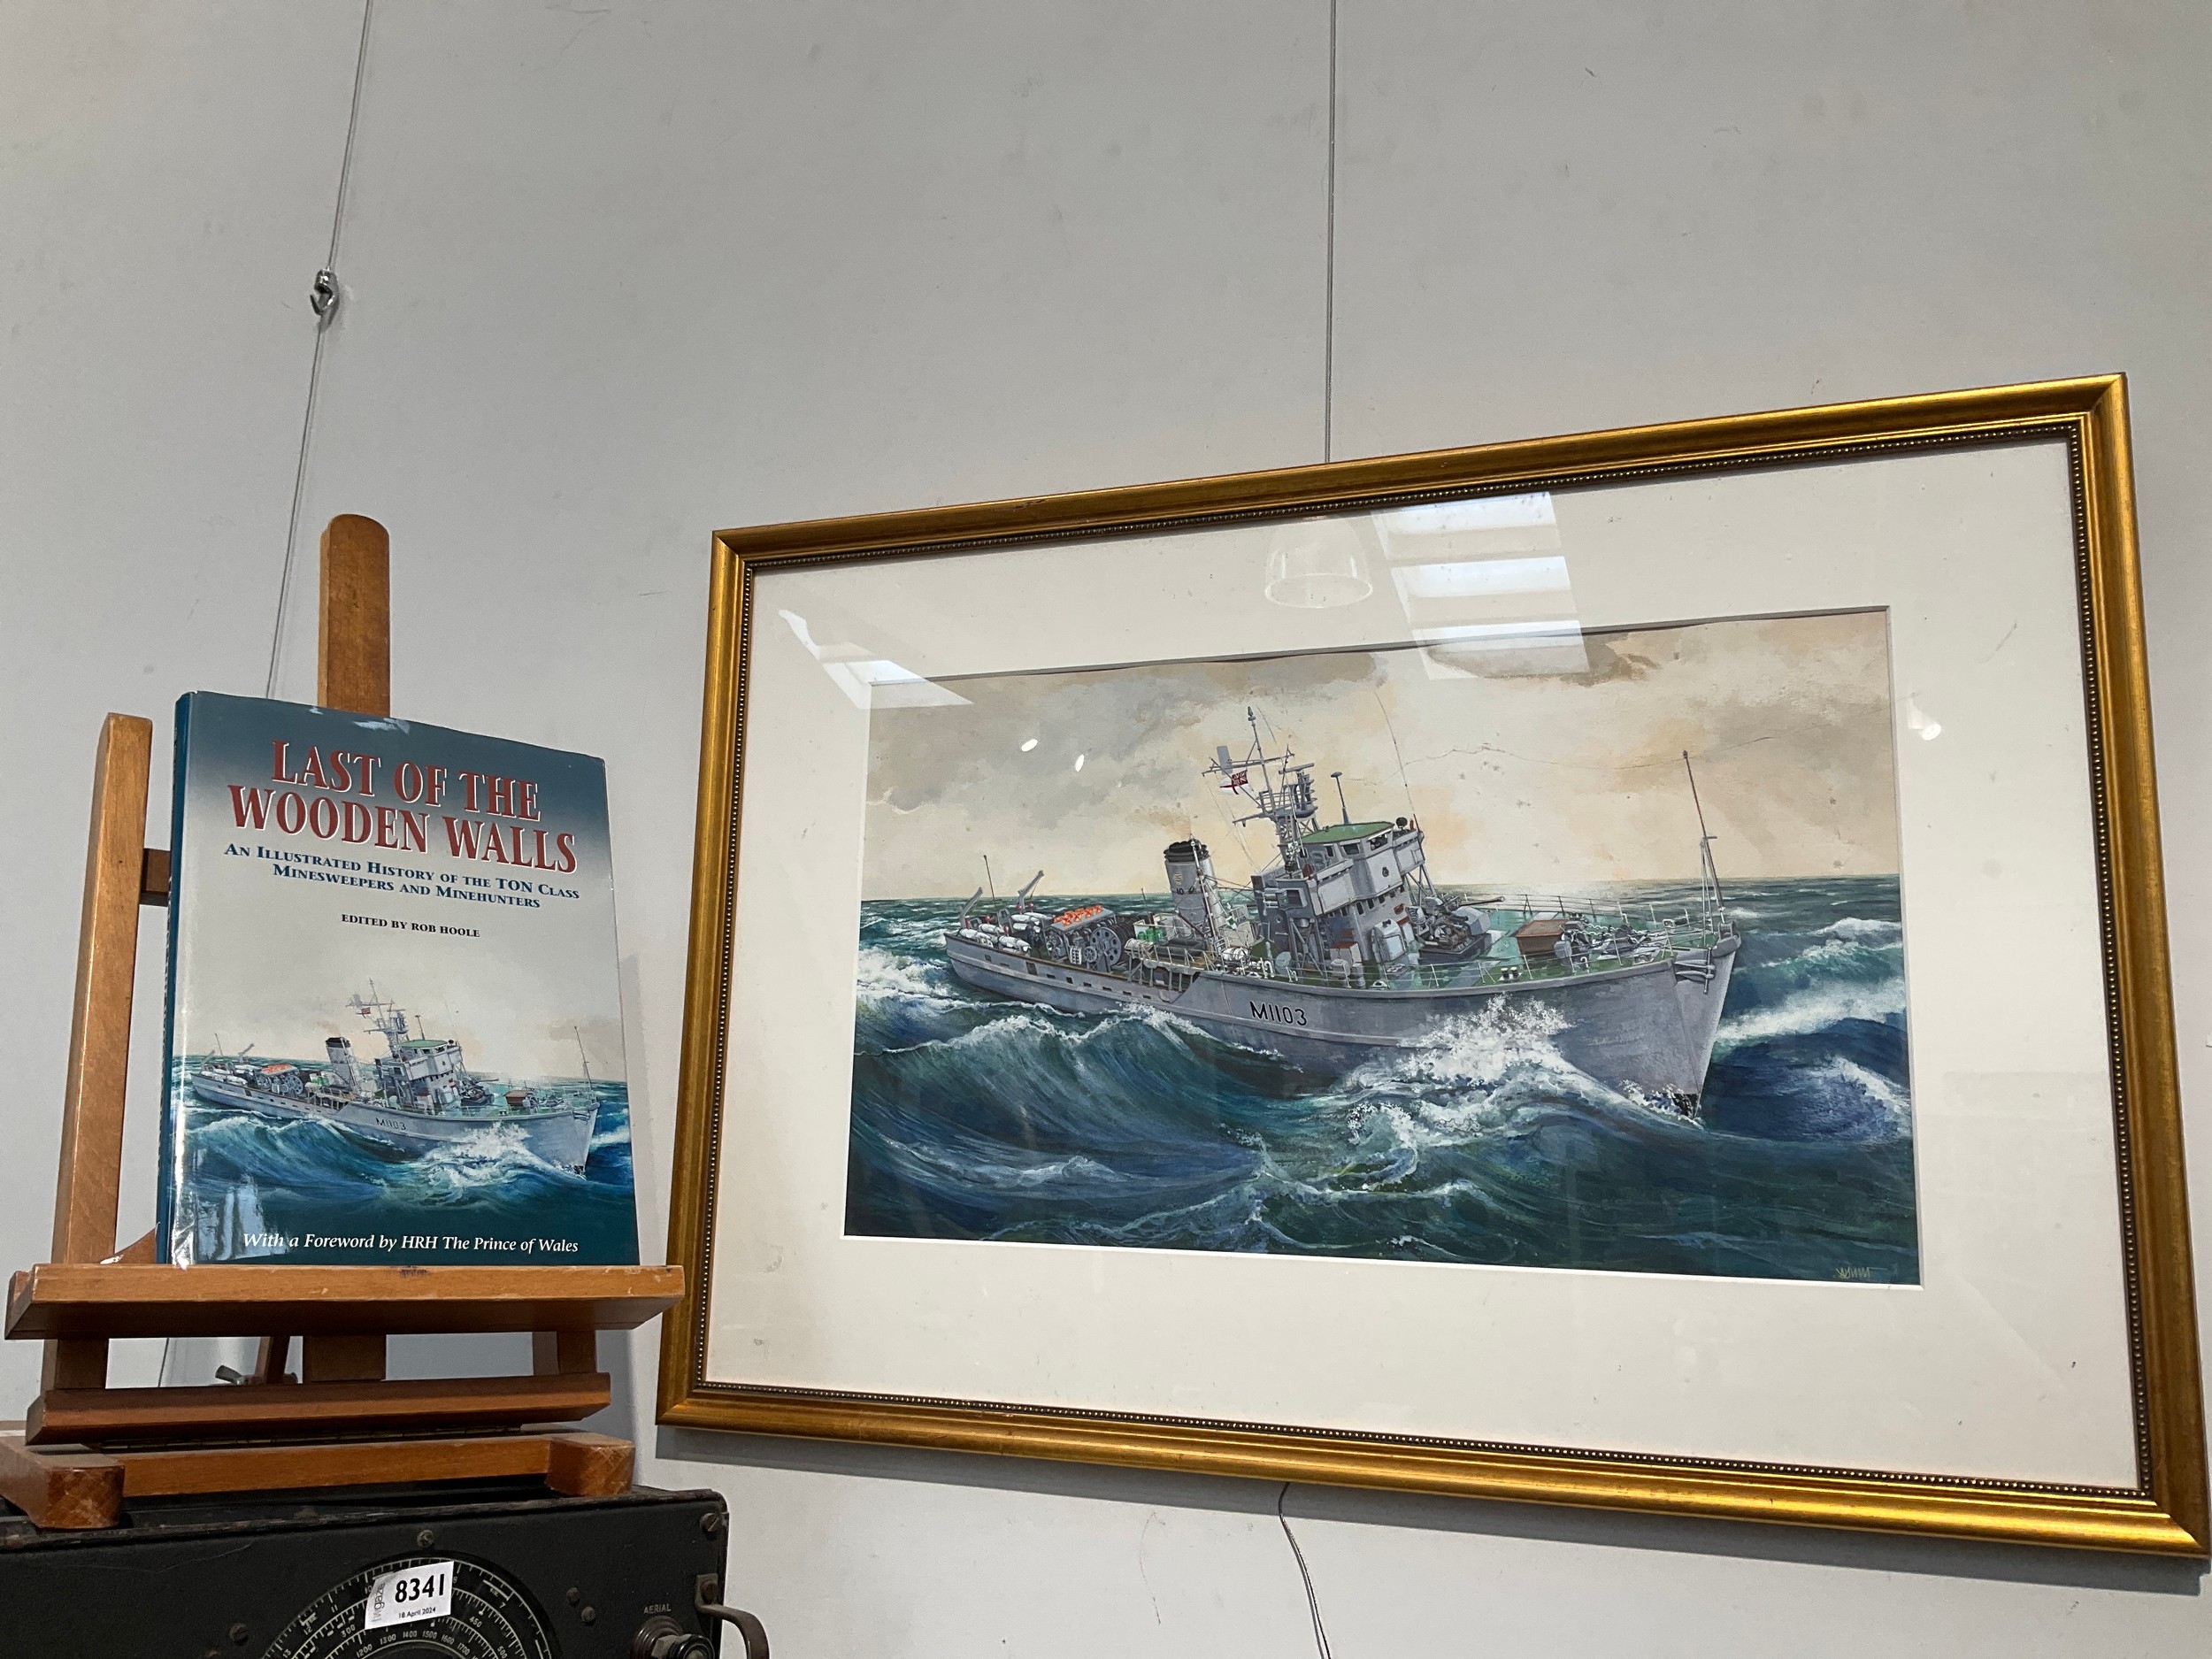 A painting of a torpedo boat together with a book 'Last of the Wooden Walls' (2)